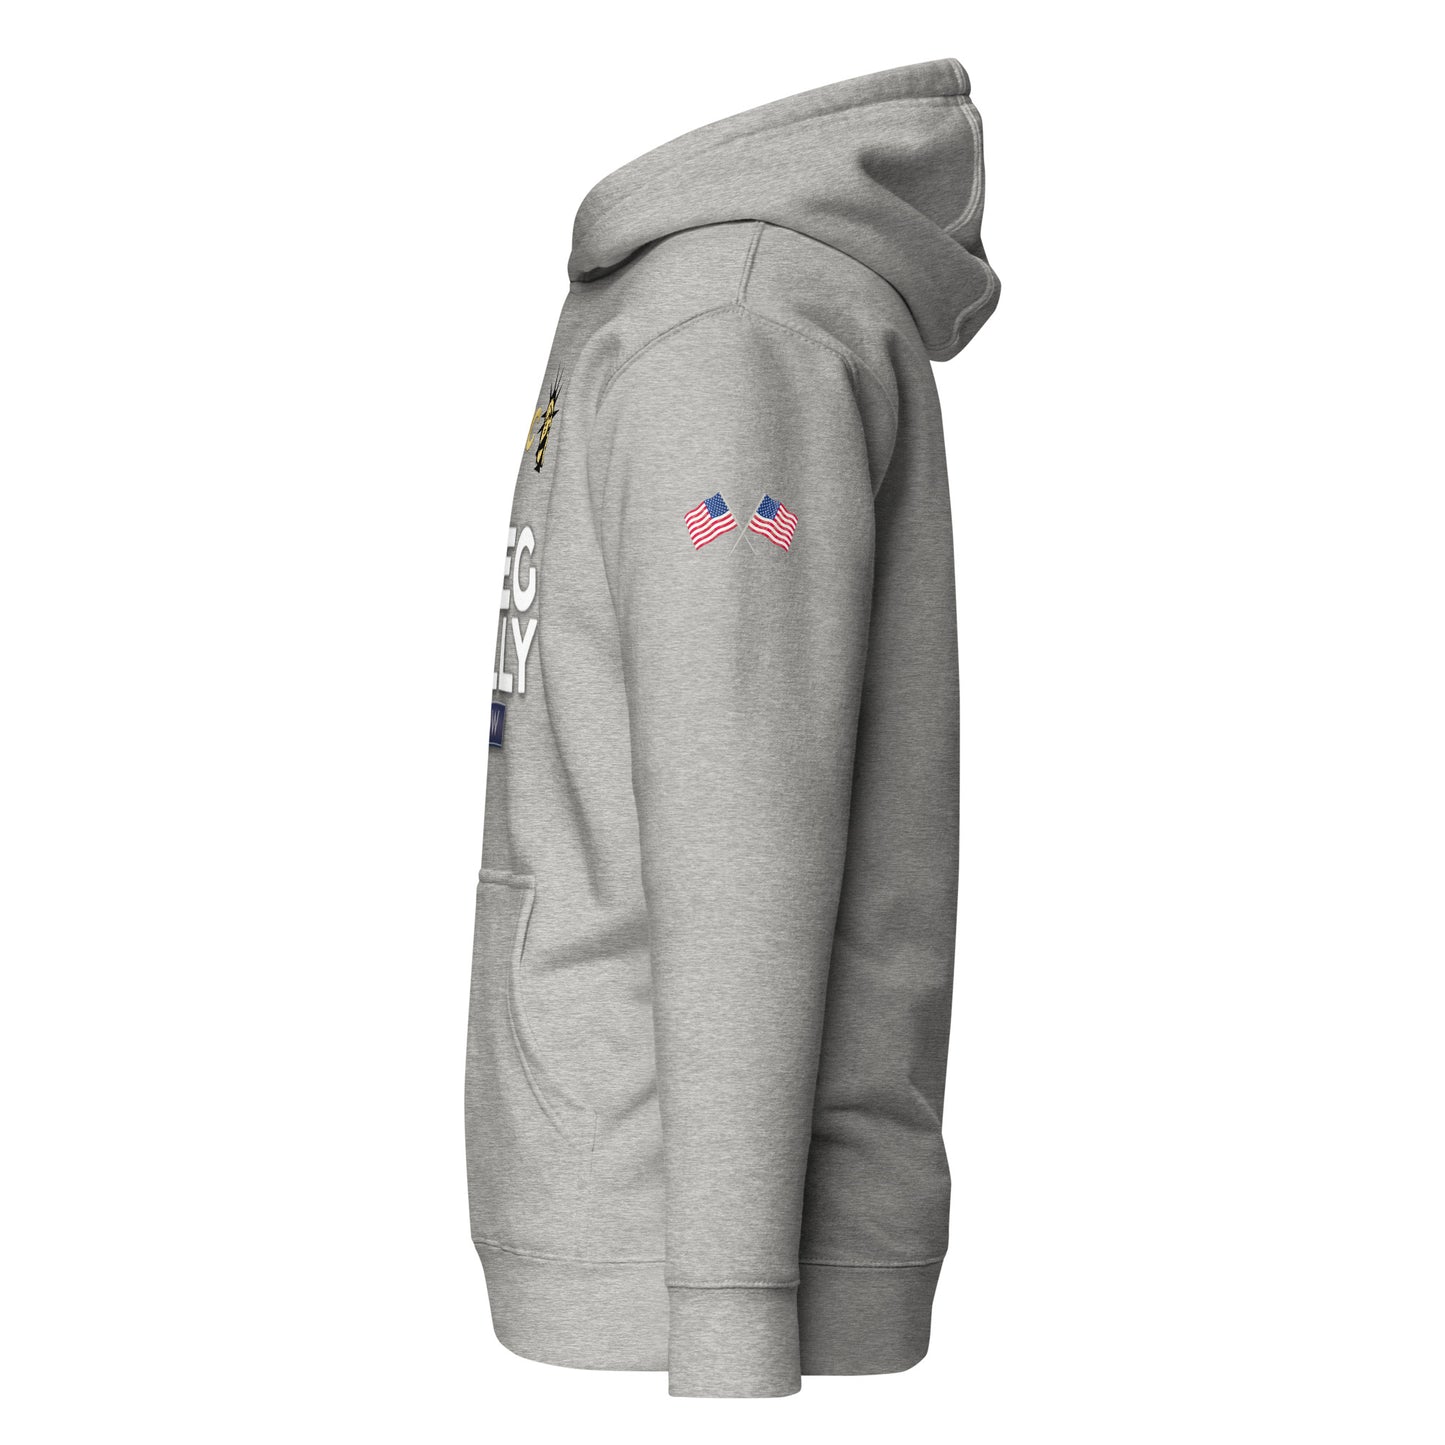 The Greg Kelly Show Unisex Hoodie